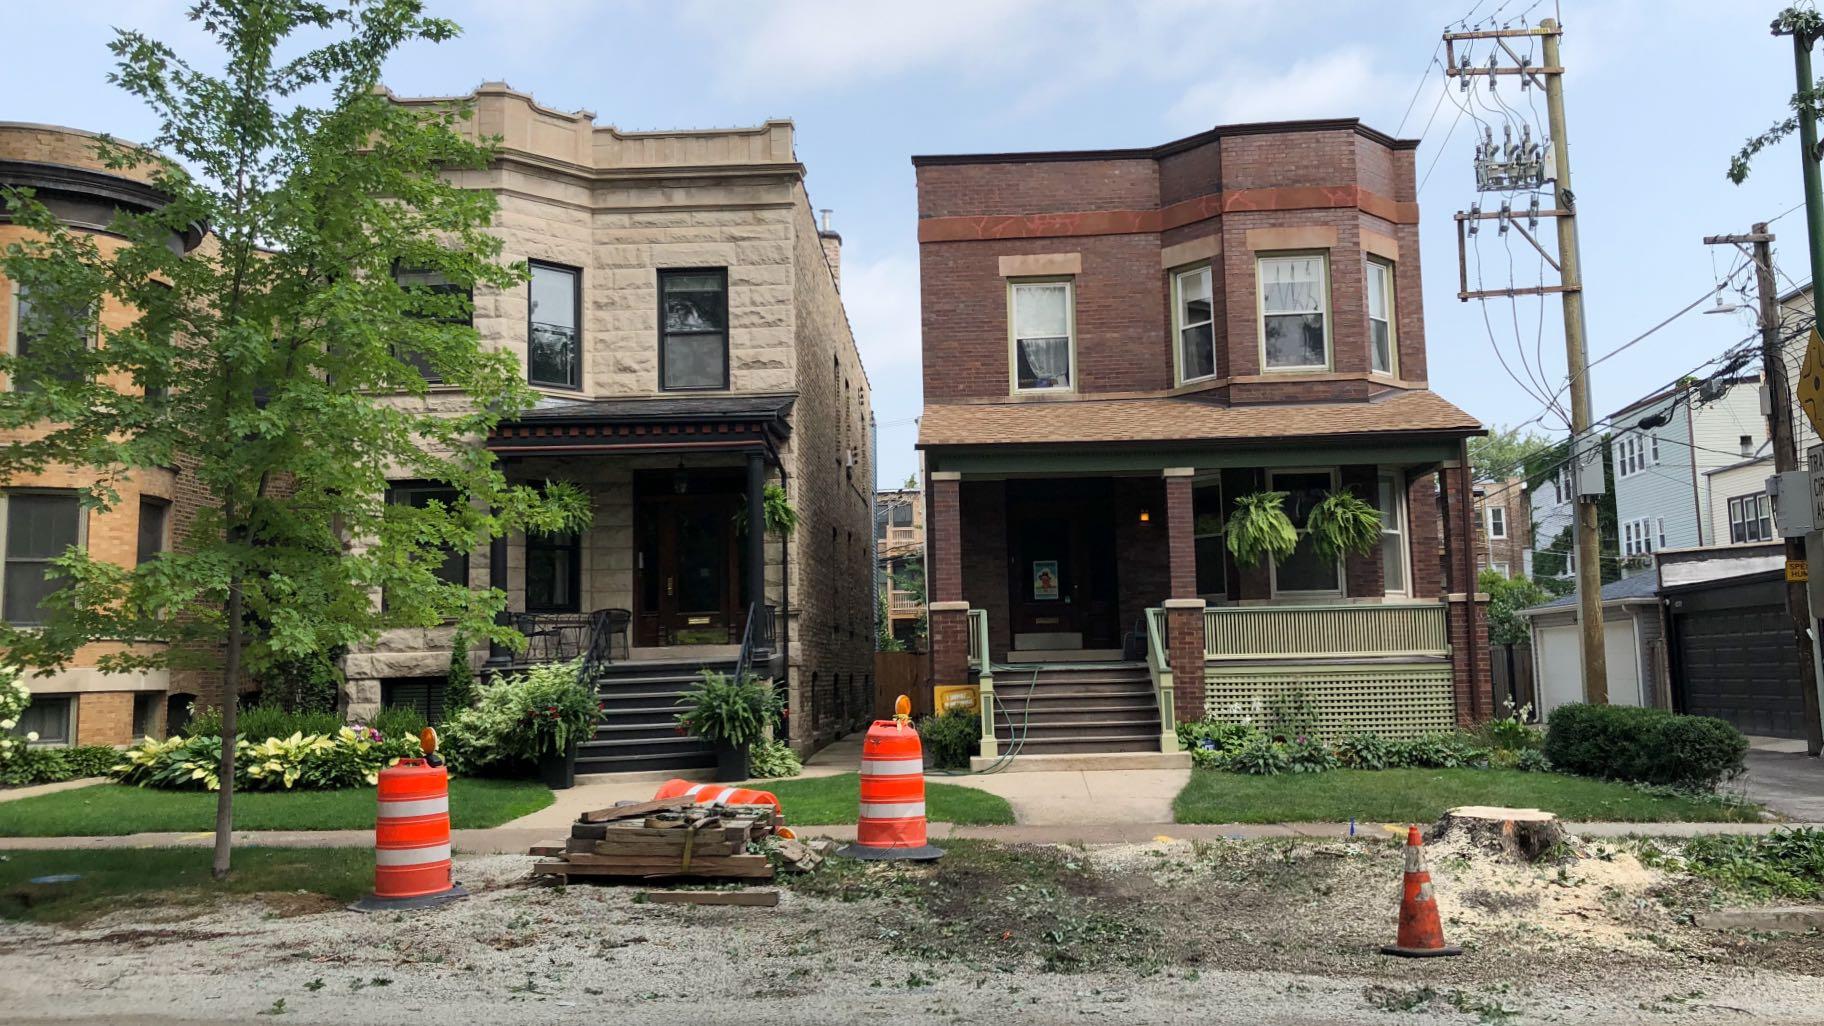 With a tree removed in front of the home on the right, Chicago has a new gap in its tree canopy cover. (Patty Wetli / WTTW News)